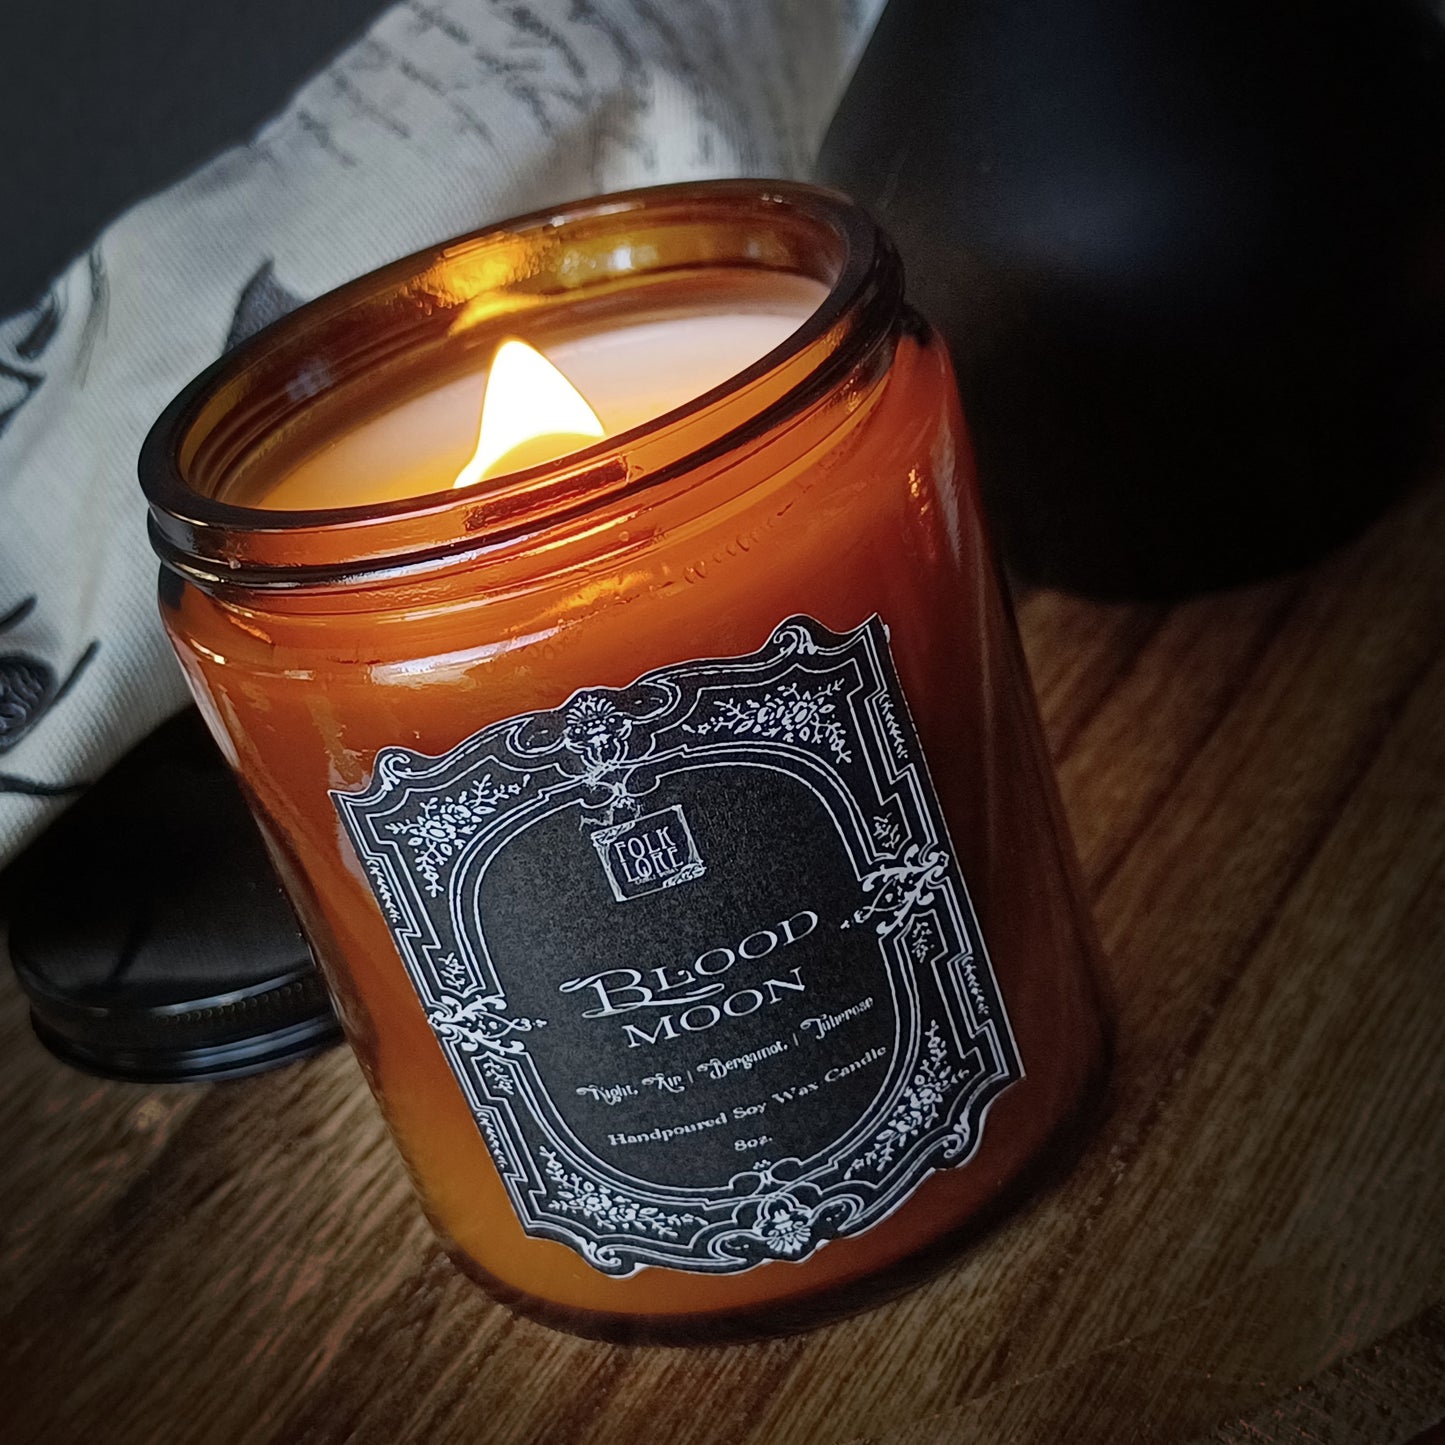 Blood Moon || Scented Soy Wax Candle